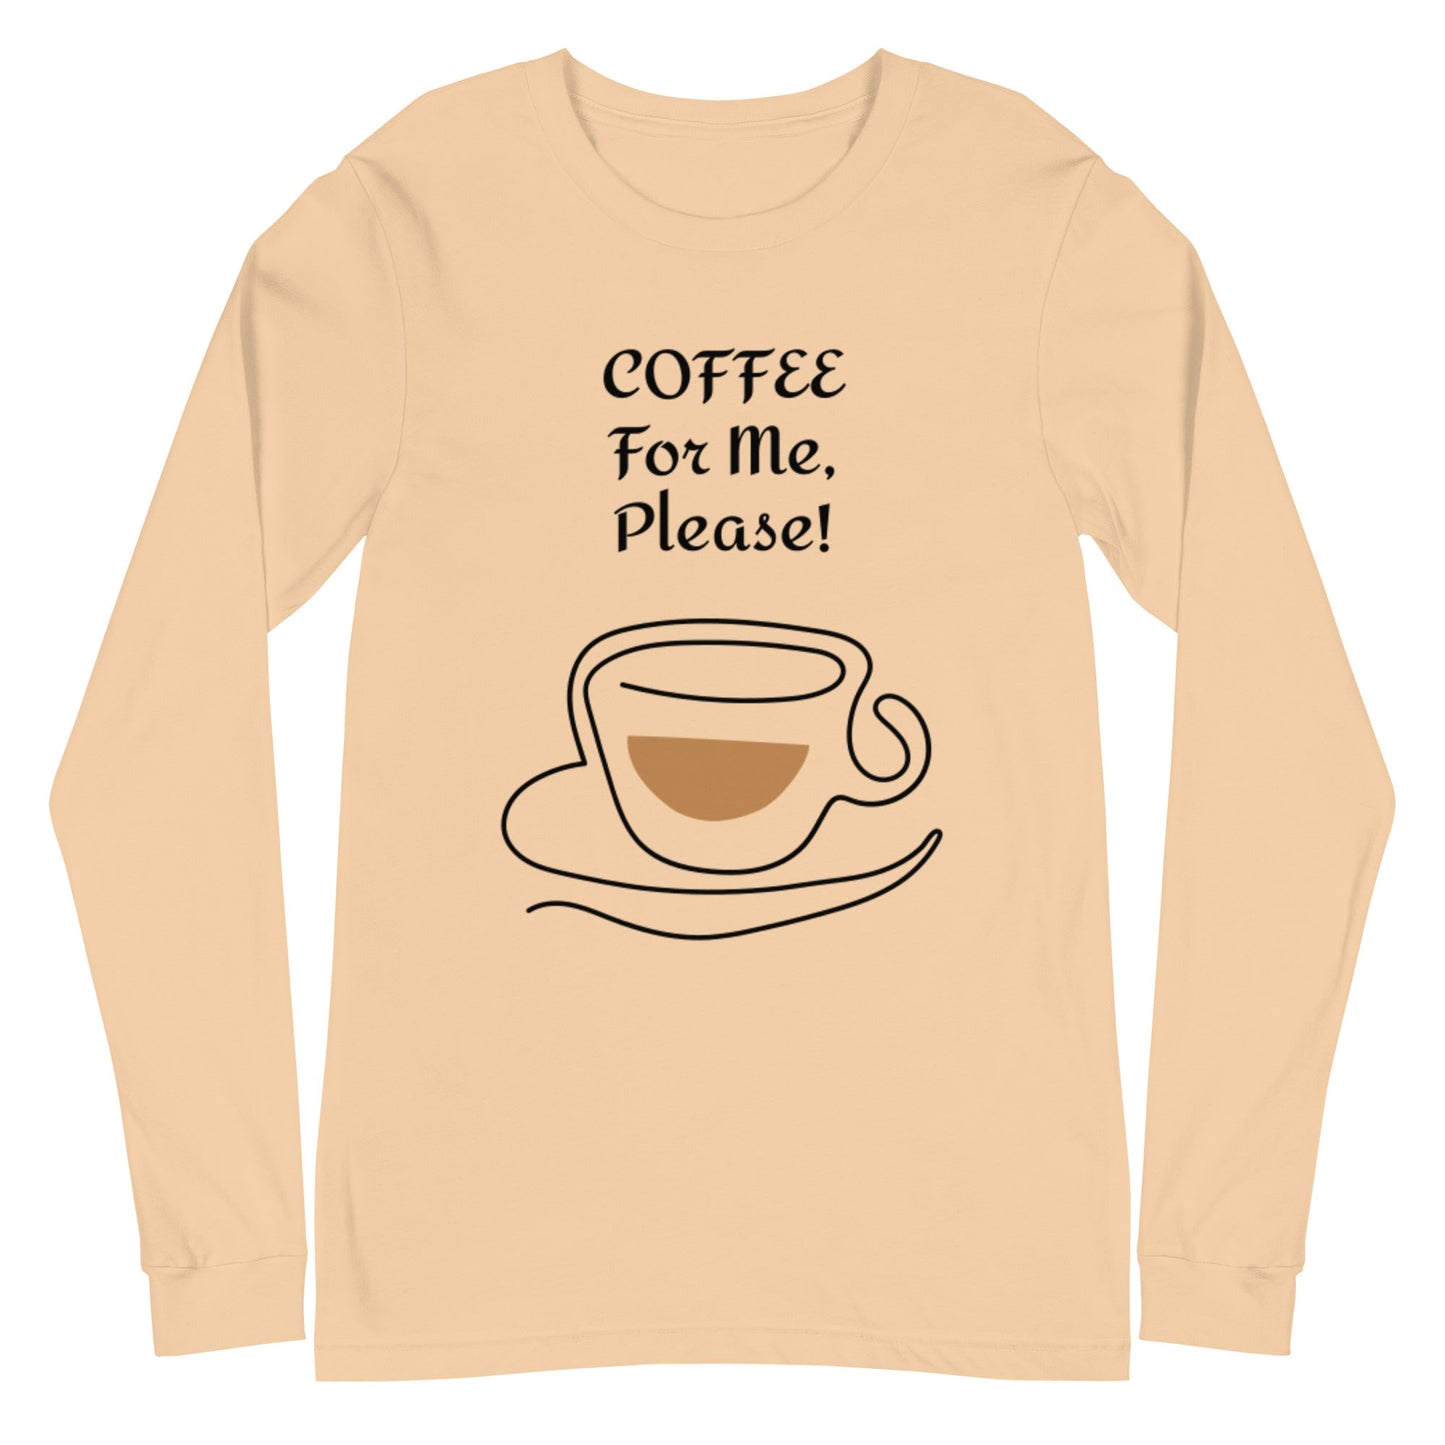 COFFEE For ME, Please! w/ a Cup and Saucer Unisex Long Sleeve Tee - Lizard Vigilante